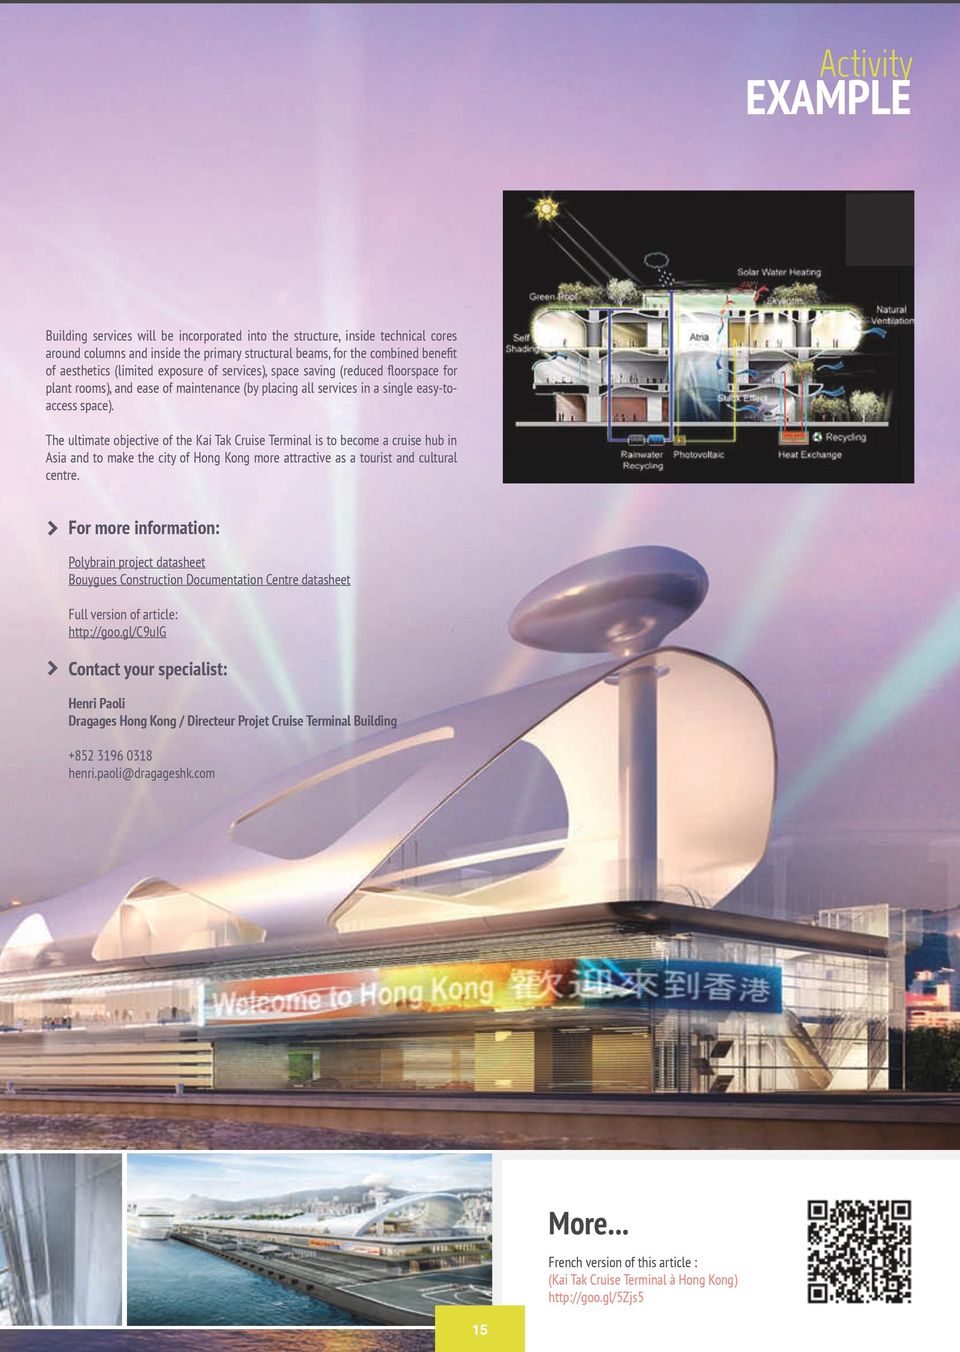 The ultimate objective of the Kai Tak Cruise Terminal is to become a cruise hub in Asia and to make the city of Hong Kong more attractive as a tourist and cultural centre.